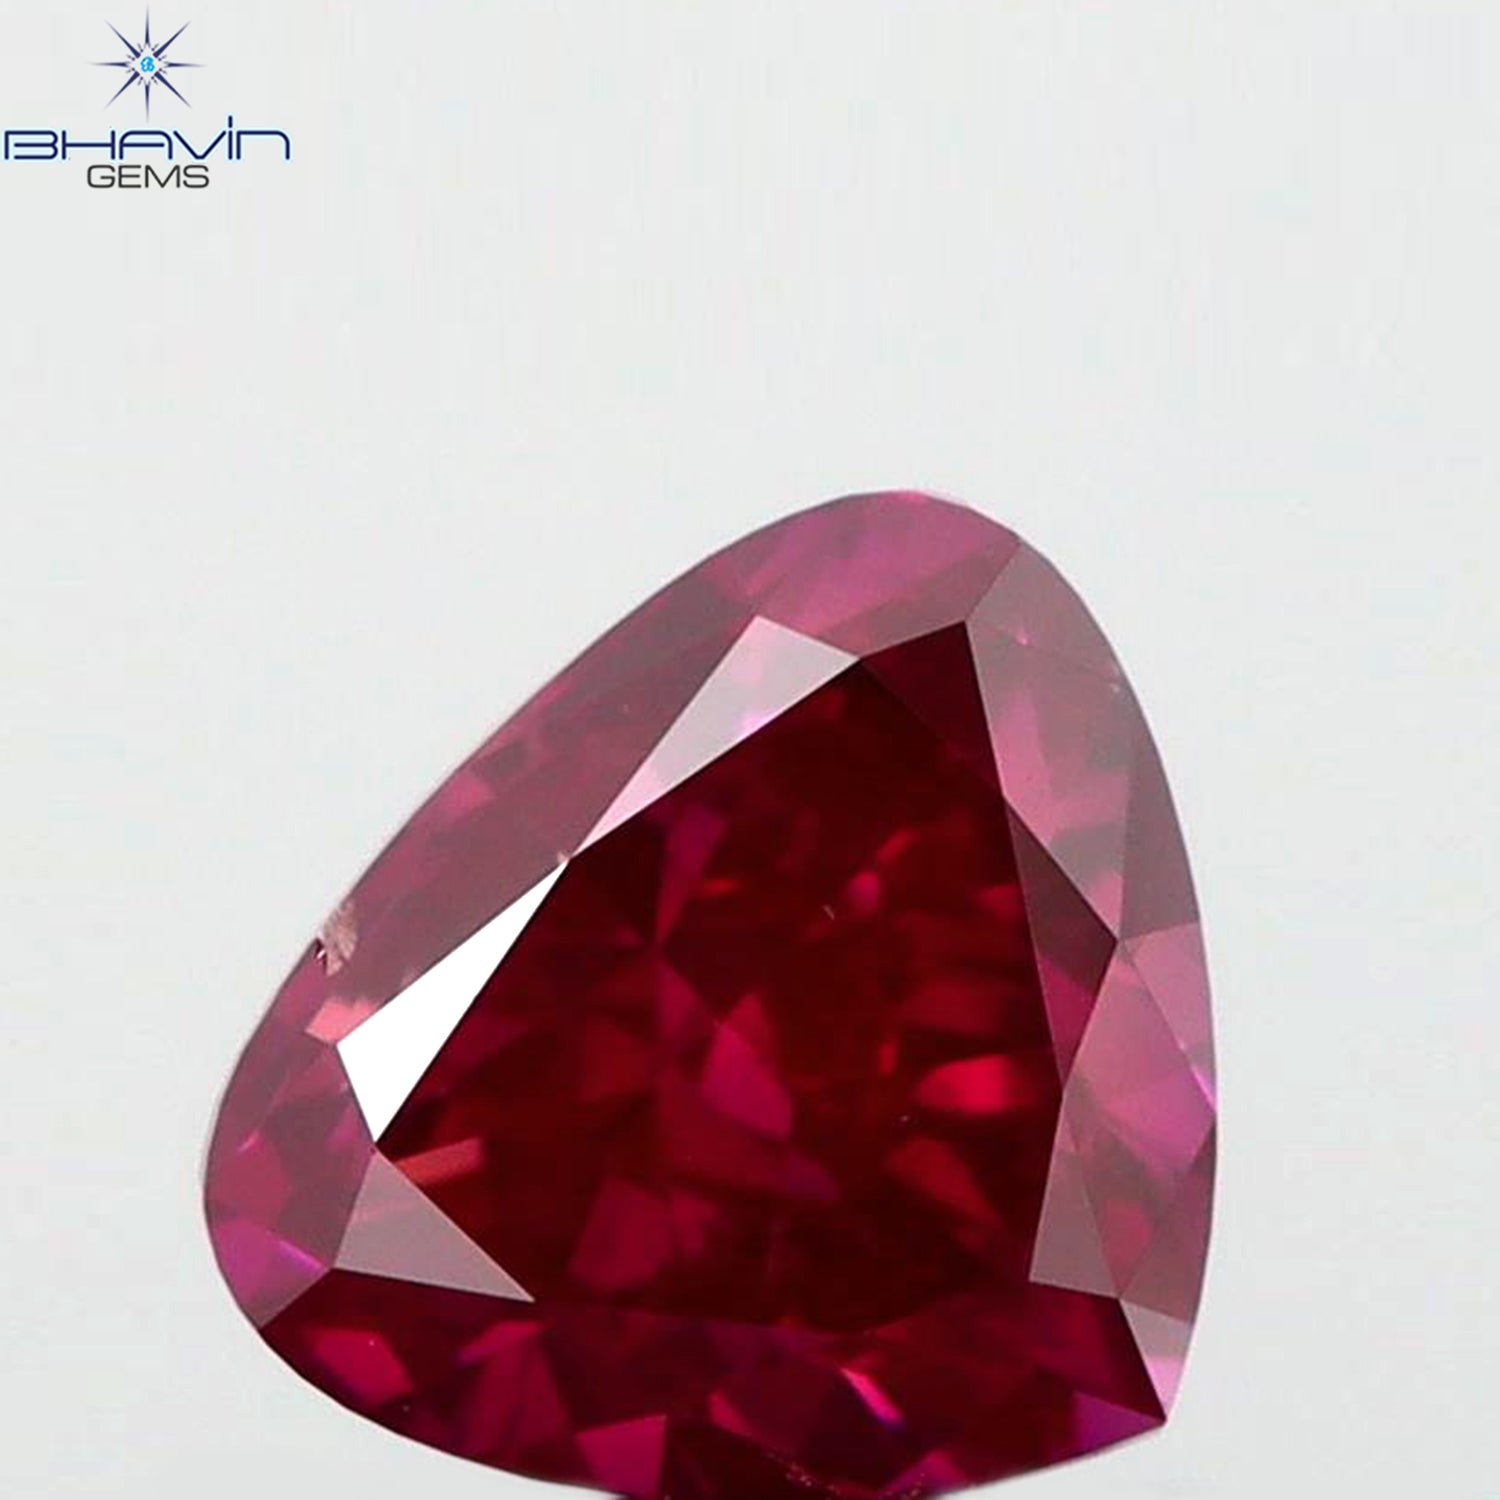 0.49 CT Heart Shape Natural Loose Diamond Pink Color VS2 Clarity (4.90 MM)